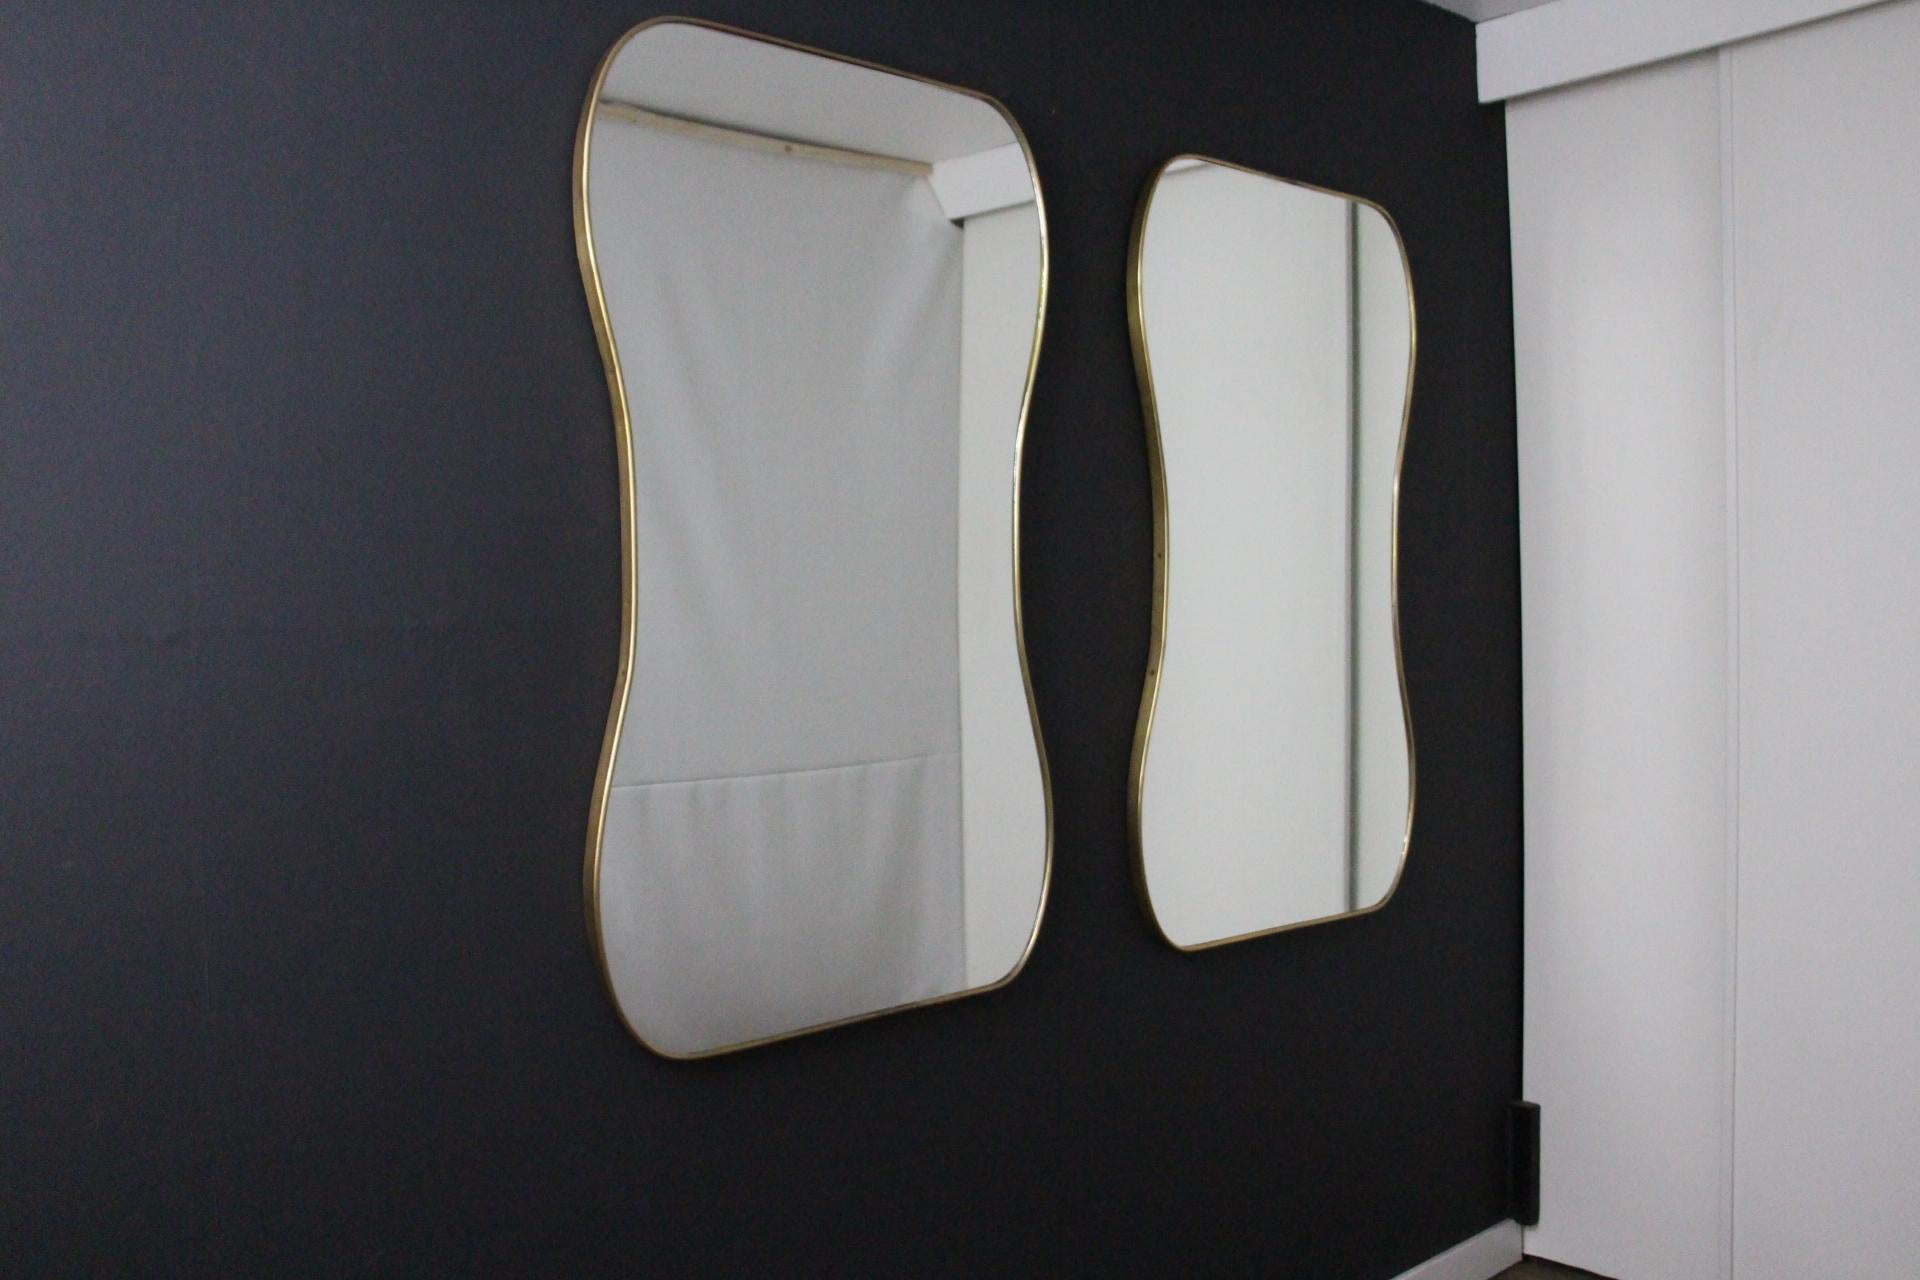 Mid-20th Century Large 1950's Modernist Shaped Brass Wall Mirror , Gio Ponti Style For Sale